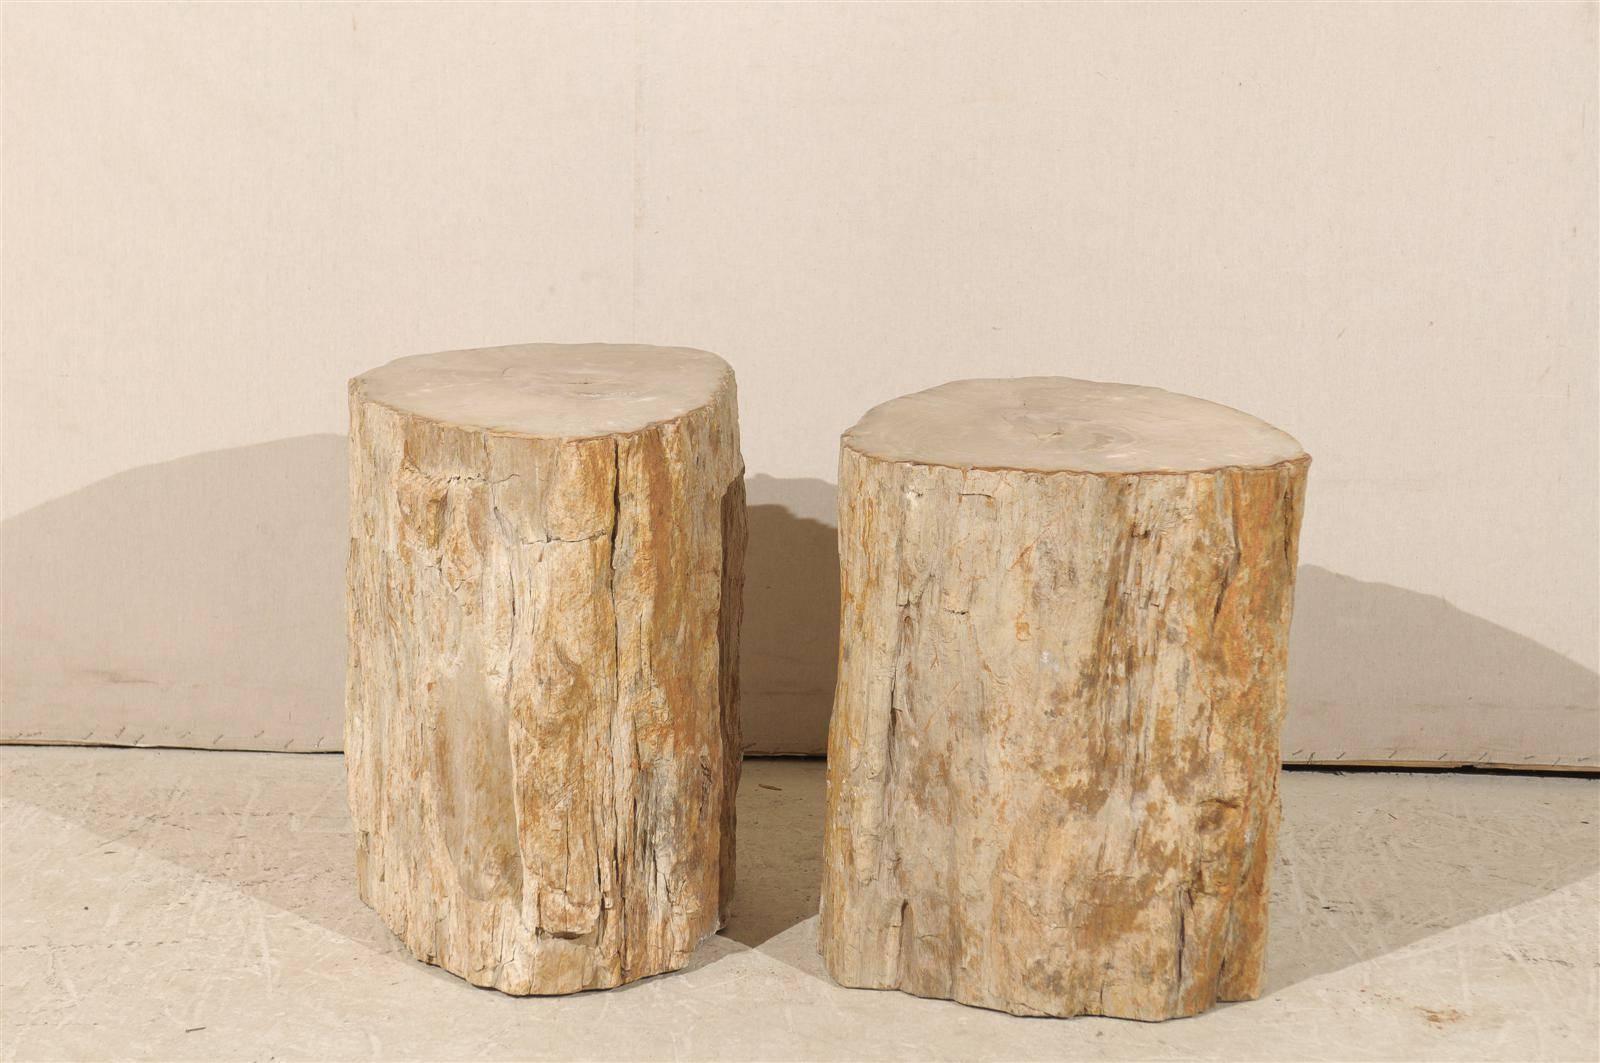 A pair of light color petrified wood drinks tables.

Petrified wood is a fossil. It is the result of a tree or tree-like plant having completely transitioned to stone. All the organic materials have been replaced with minerals. The petrifaction